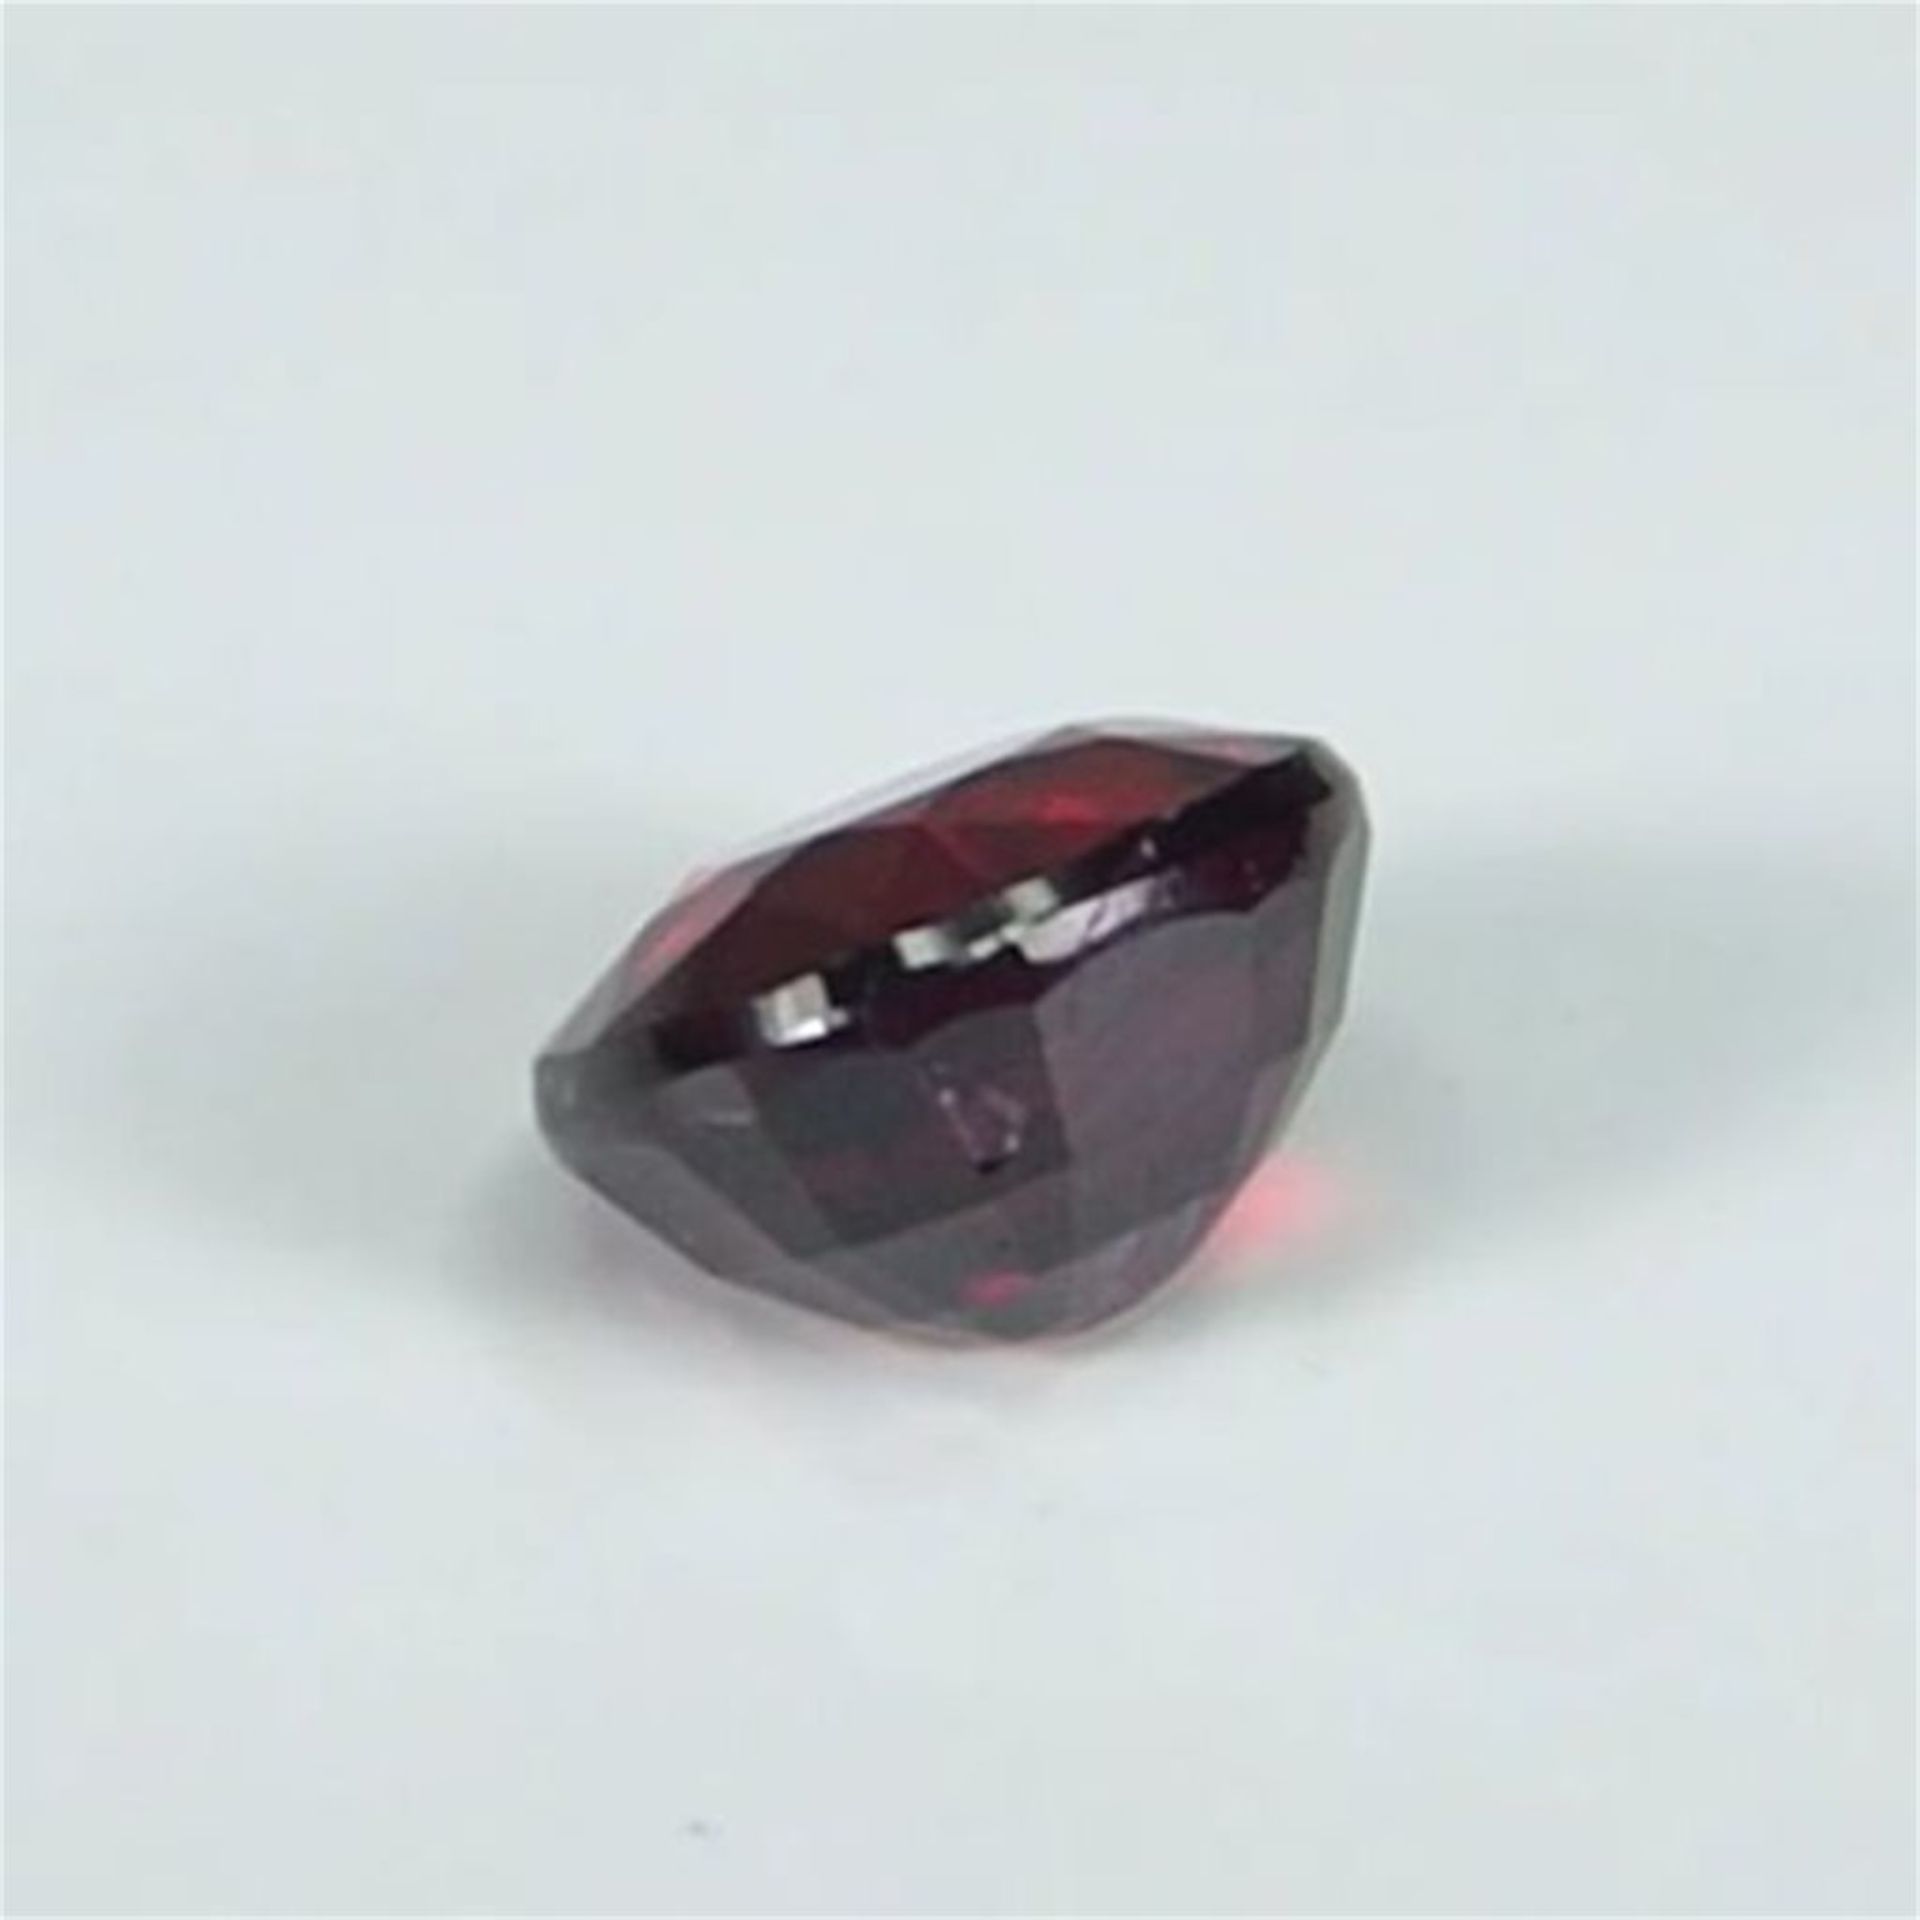 GIA Certified 1.09 ct. Untreated Pigeon’s Blood Ruby - BURMA - Image 5 of 10